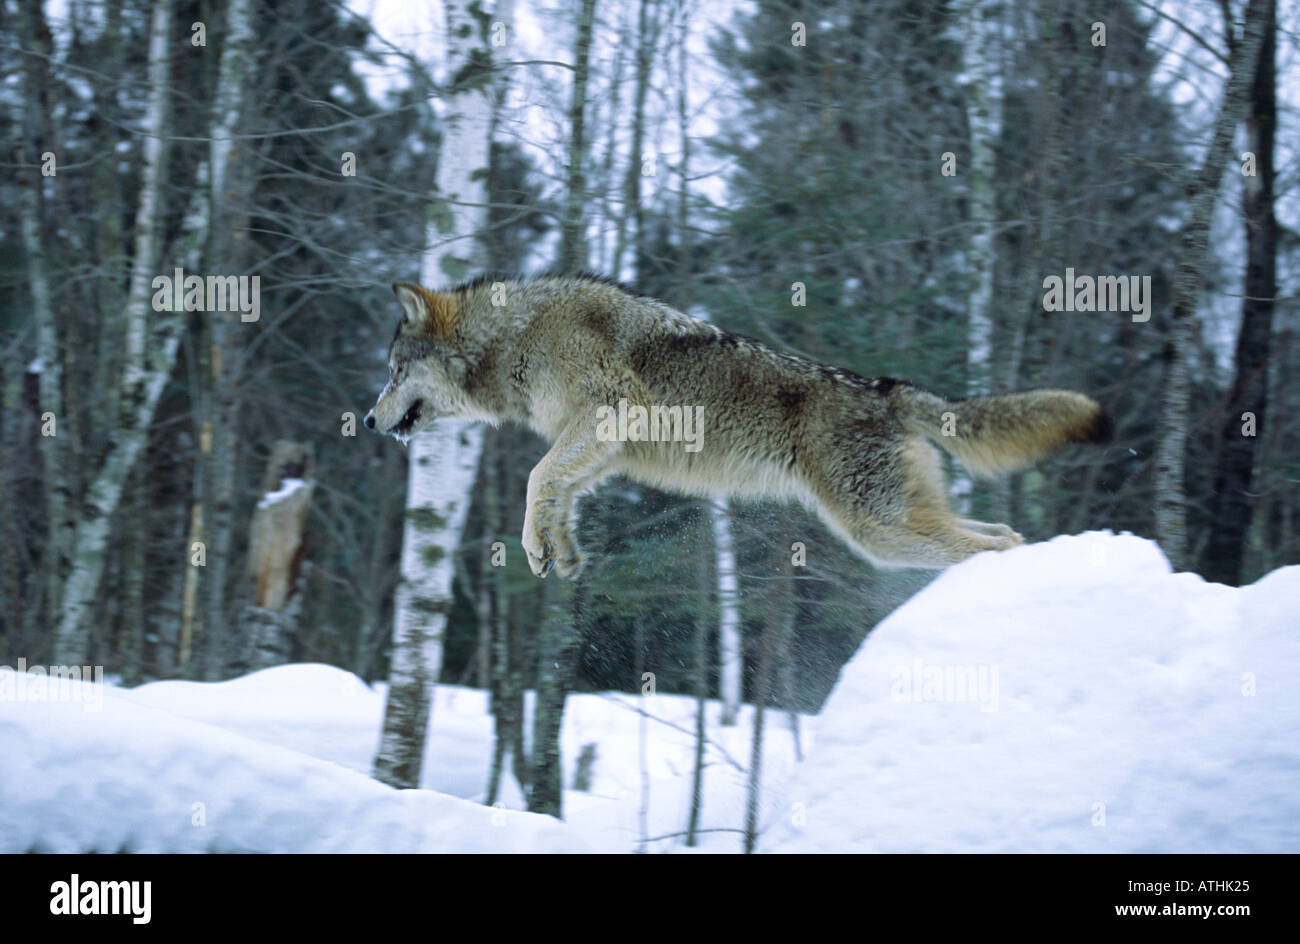 Timber or gray wolf jumping from rock Stock Photo